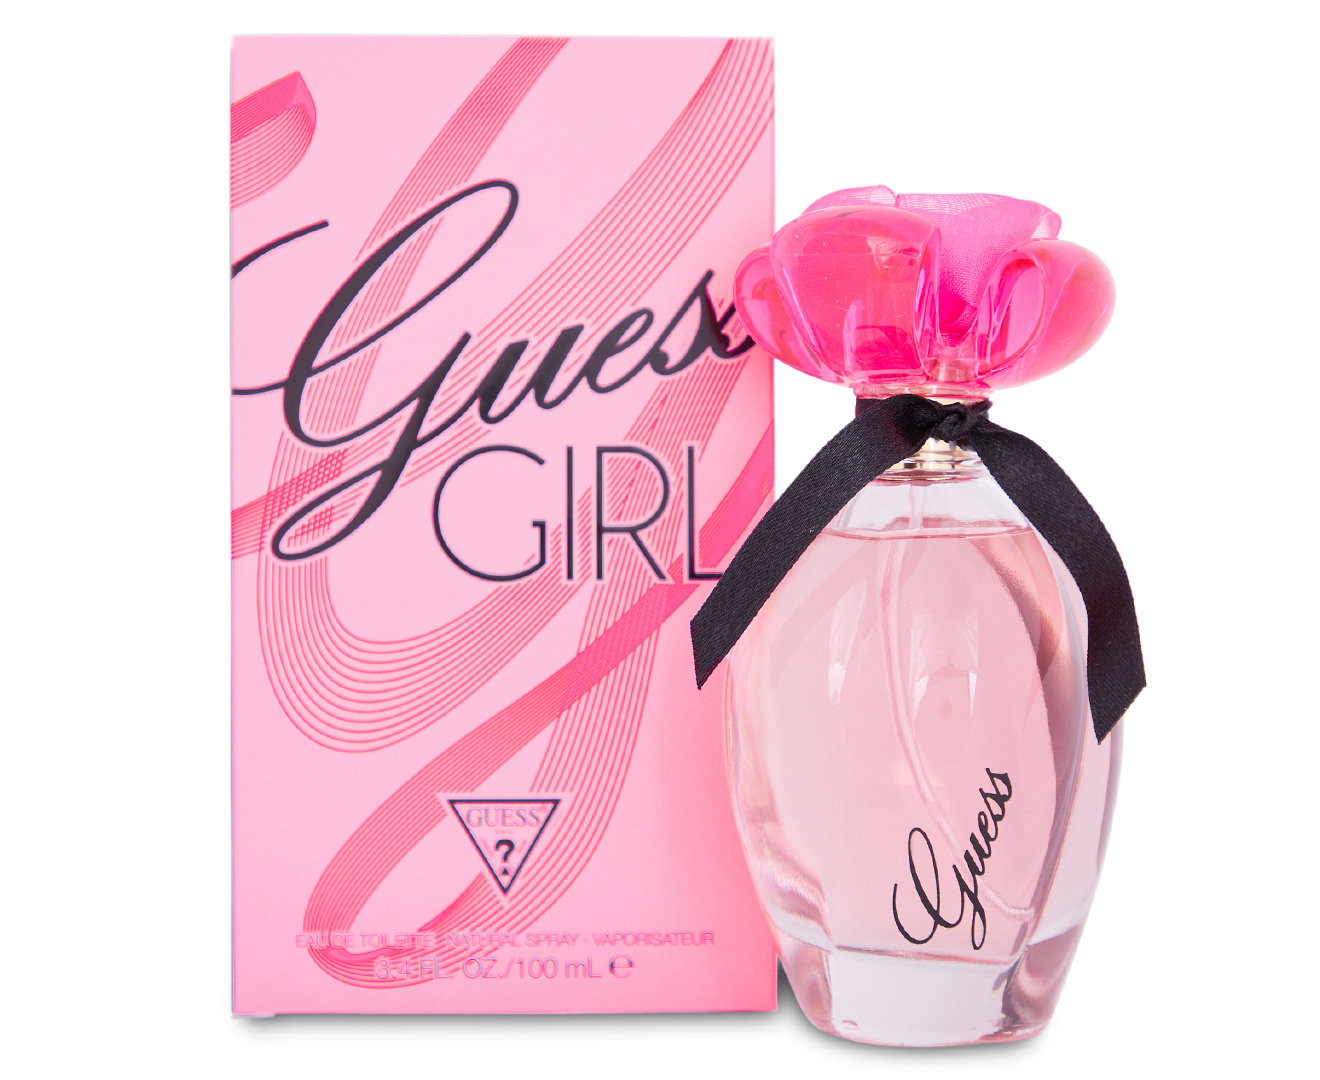 GUESS Girl For Women EDT Perfume 100mL | Www.catch.com.au